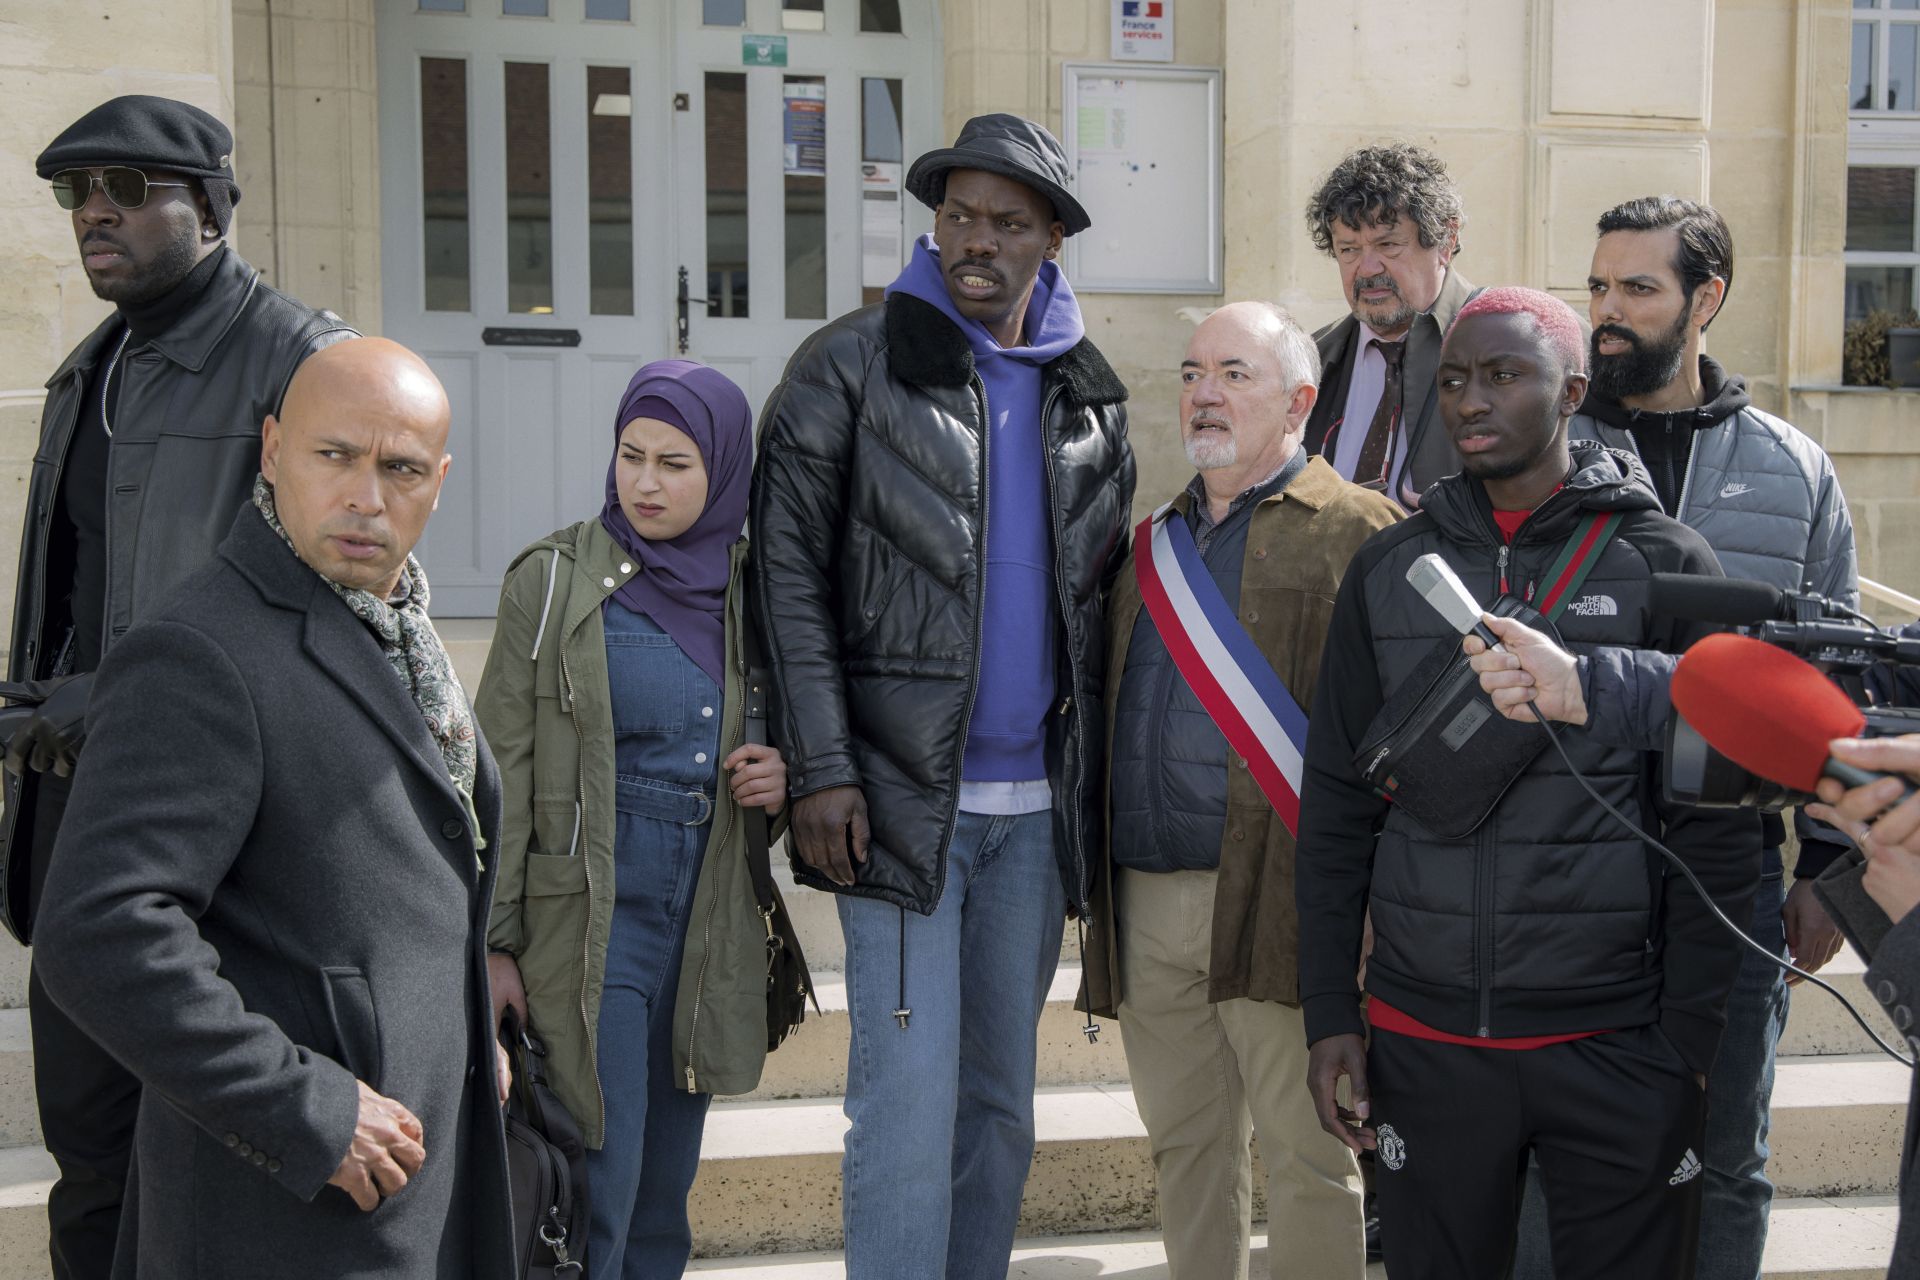 Netflix Satire Puts French Universalism to the Test